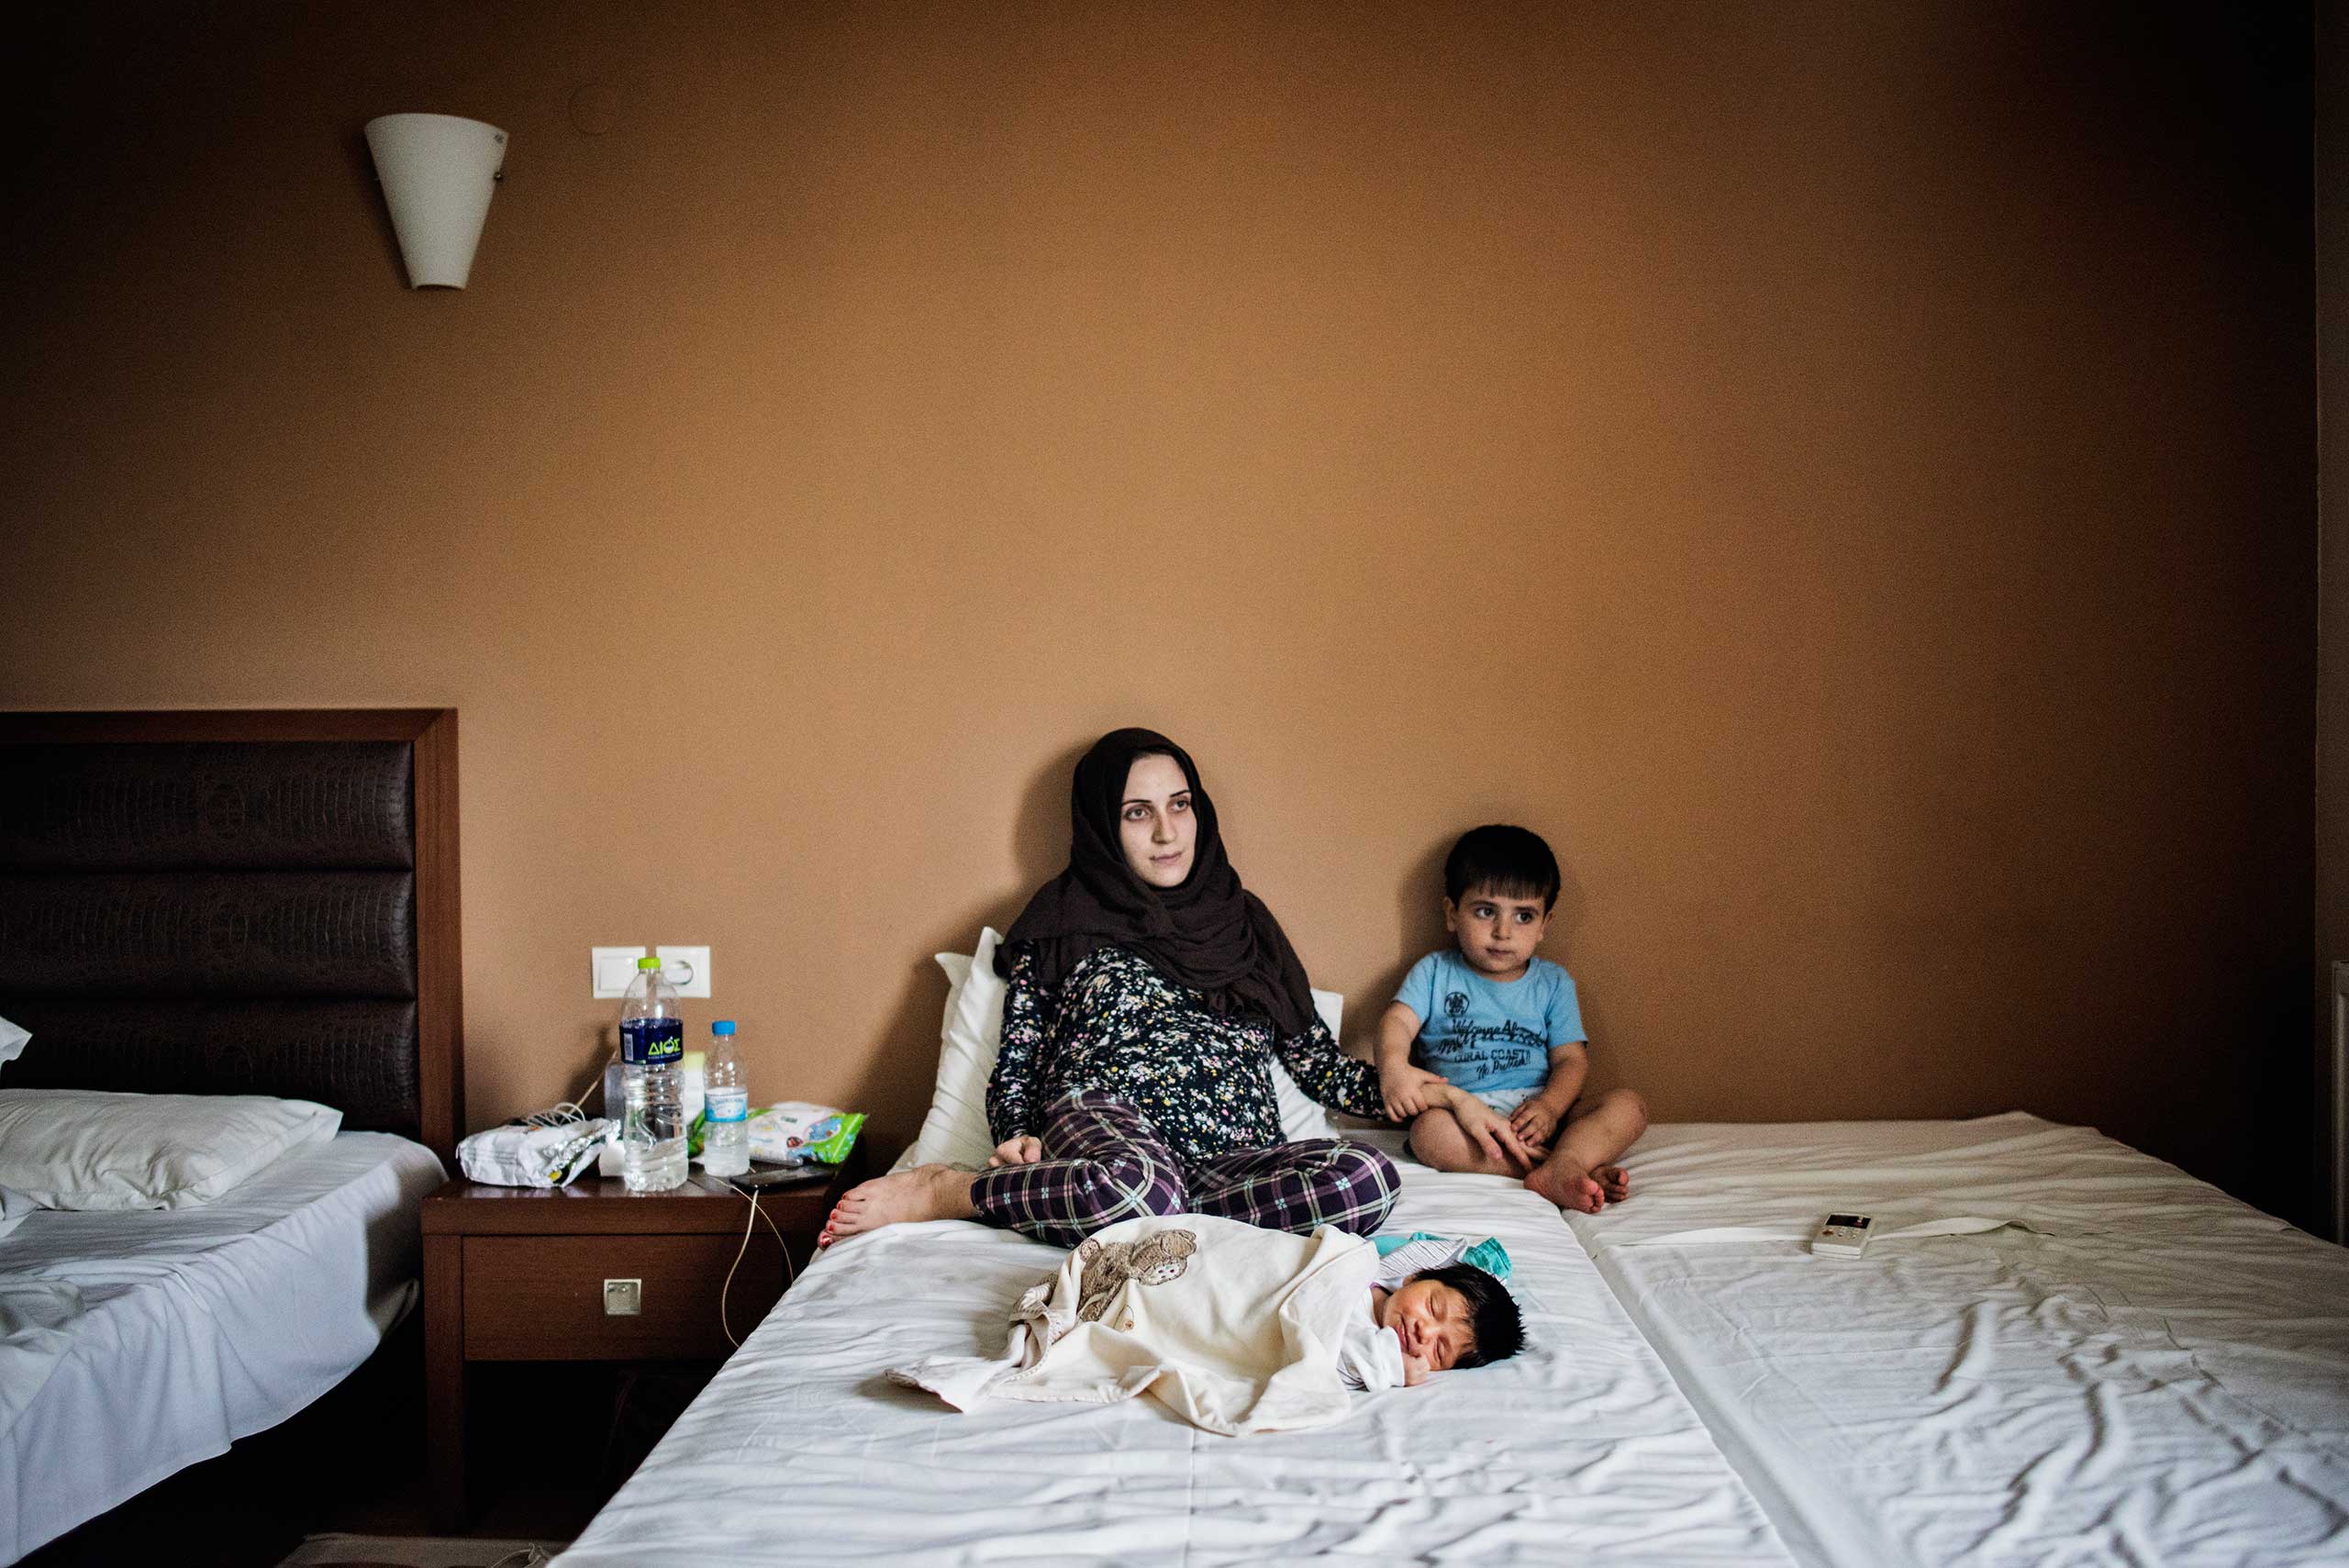 Taimaa Abazli, 24, with her newborn daughter, Heln, born by C-section on Sept. 13 at a hotel outside Thessaloniki, Greece.   Her first child, Wael, sits with them.
                              Taimaa and her husband, Muhannad 28, are from Idlib, Syria, near the border with Turkey, Sept. 19, 2016.